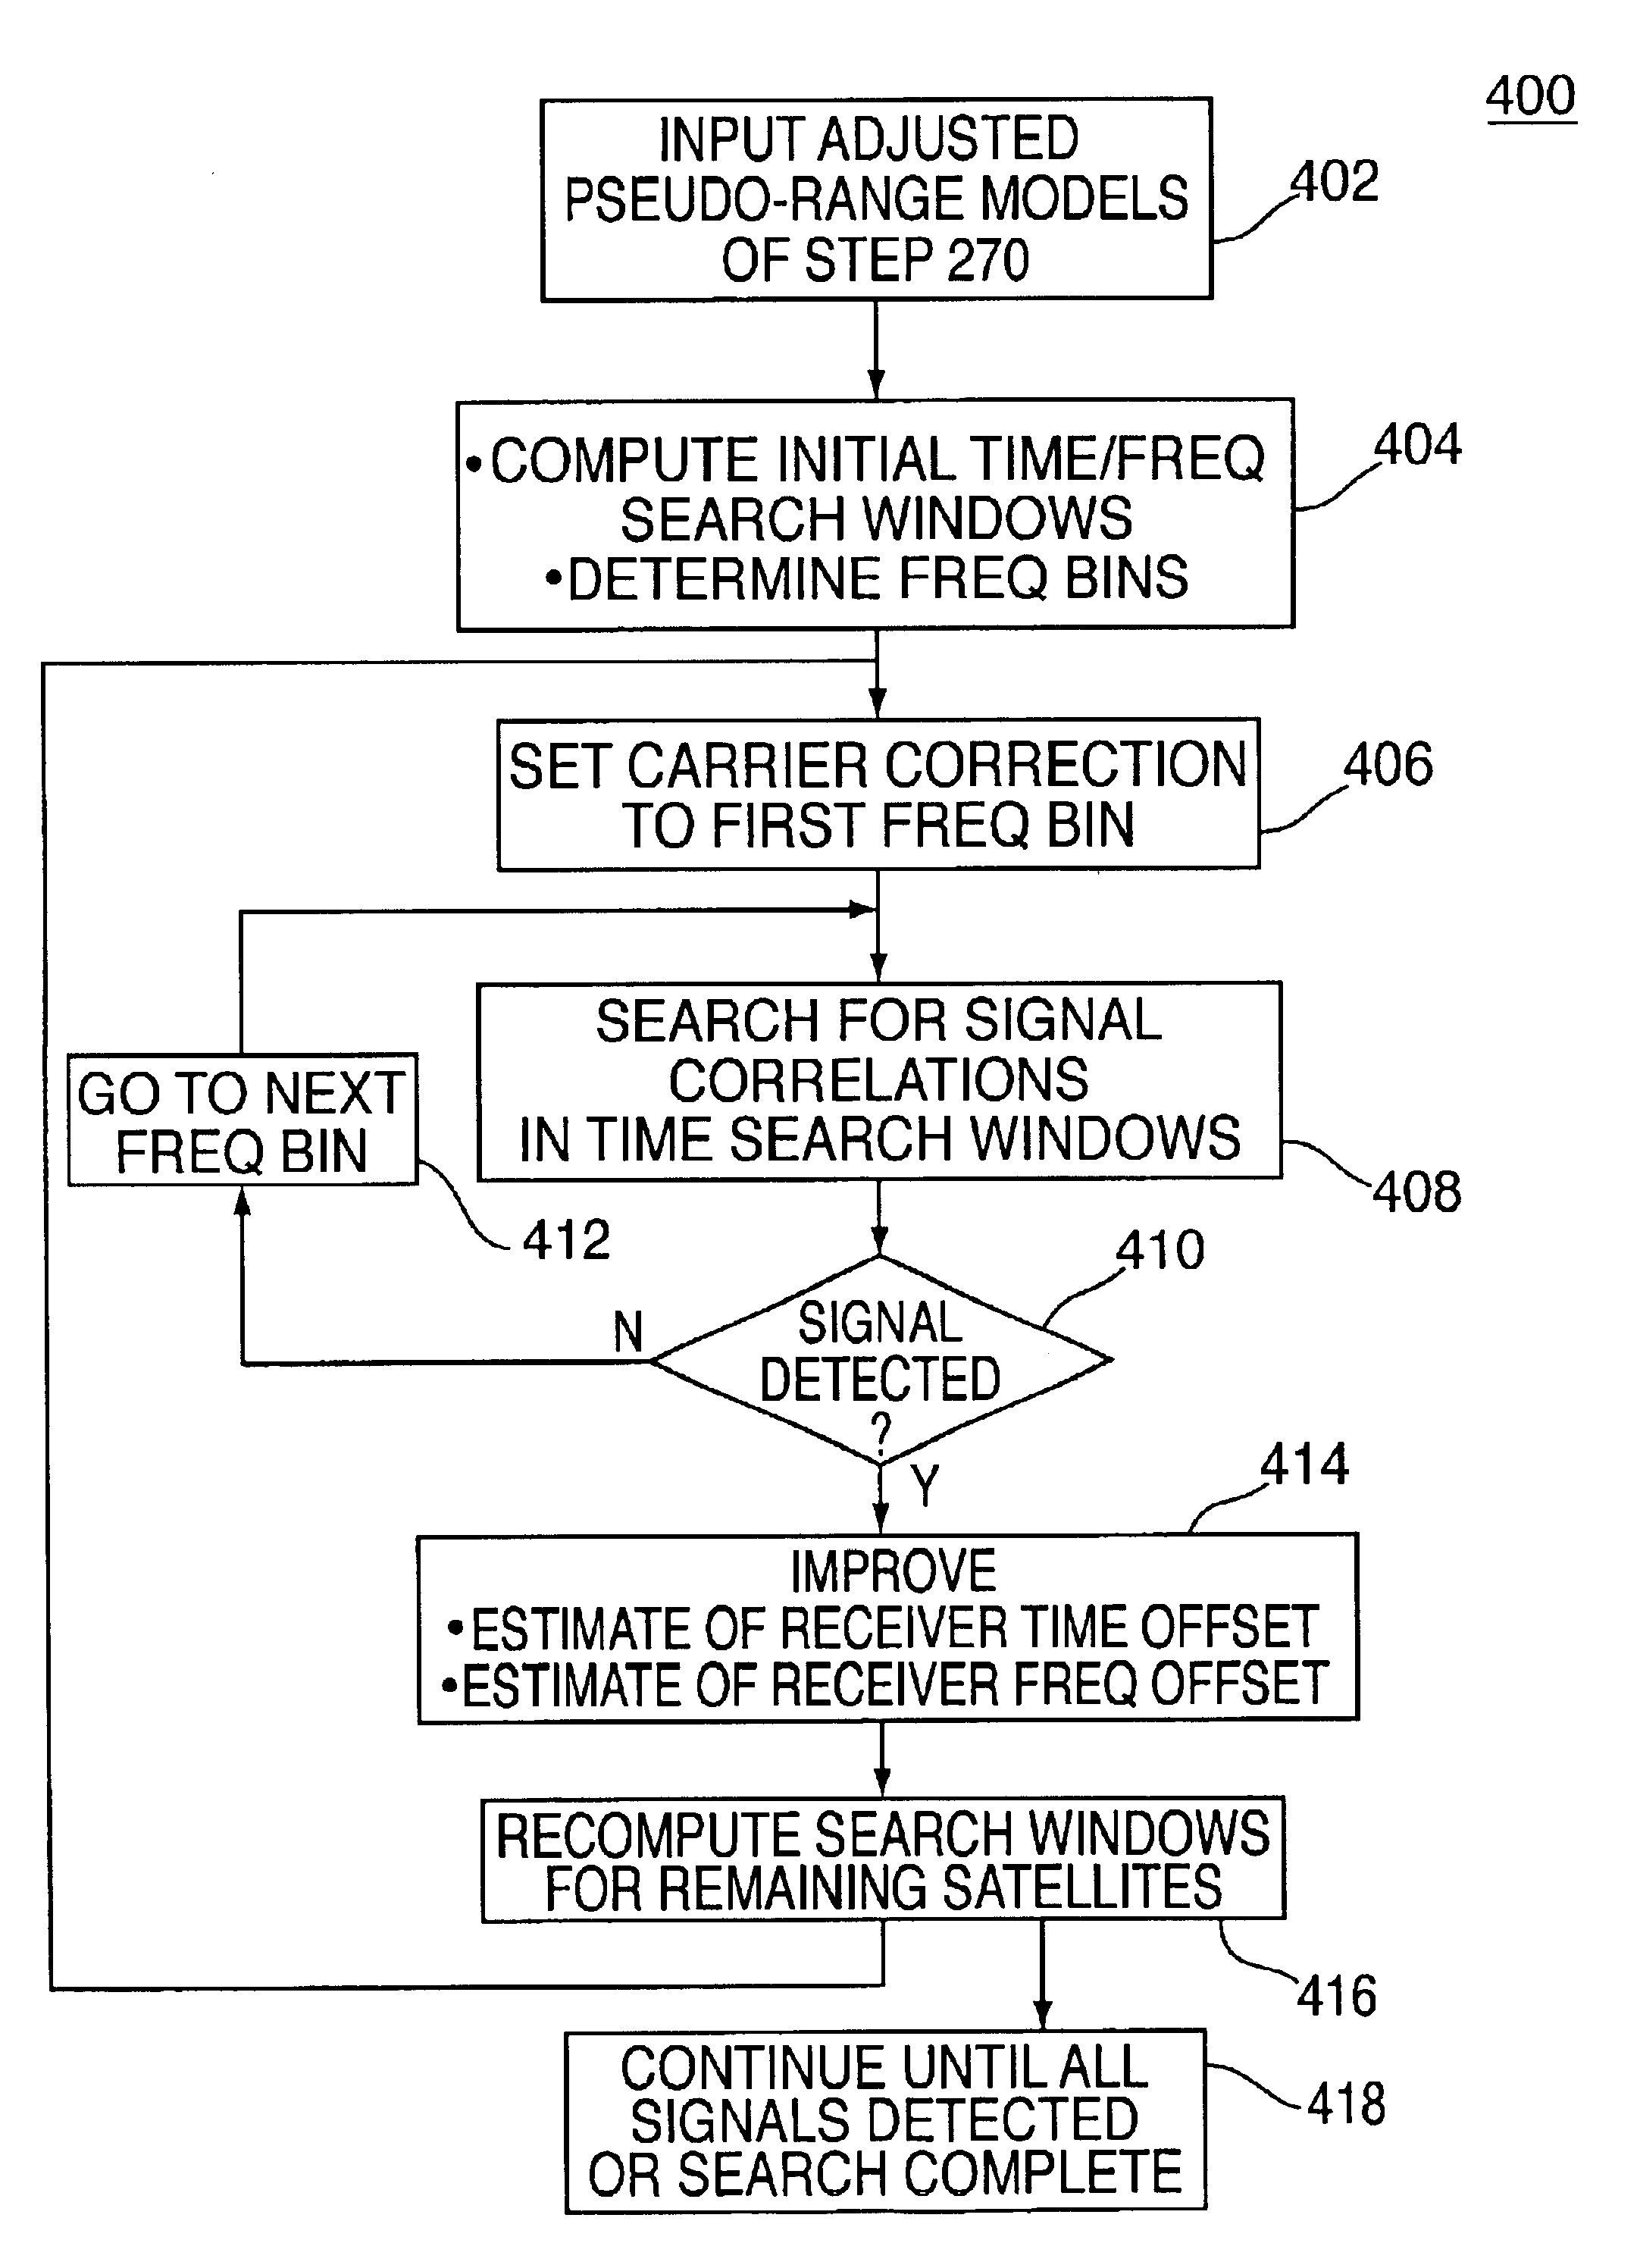 Method and apparatus for forming a pseudo-range model